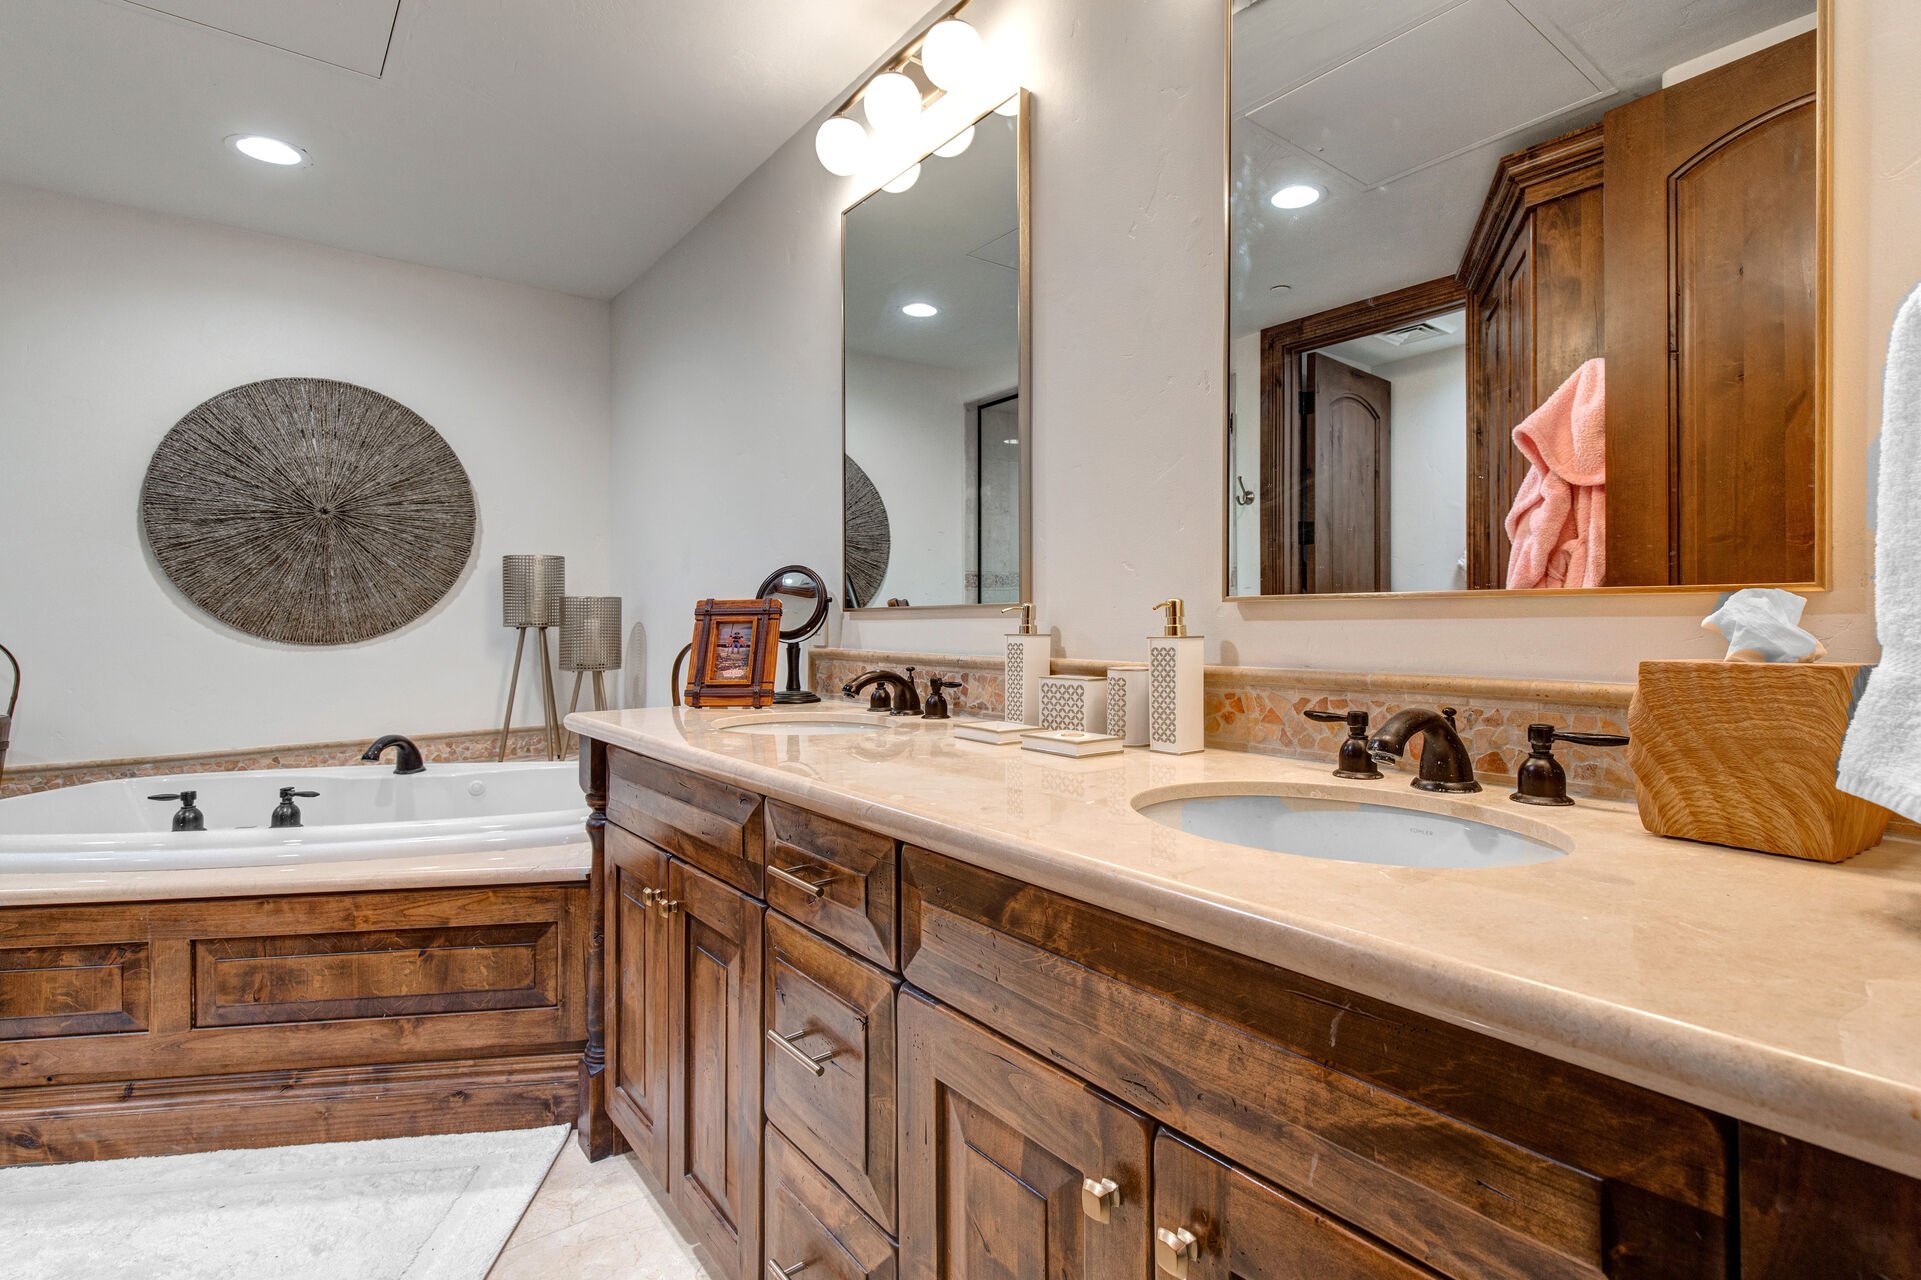 Grand Master Bath with Dual Granite Counter Sinks, and a Jetted Tub, Steam Shower and Water Closet